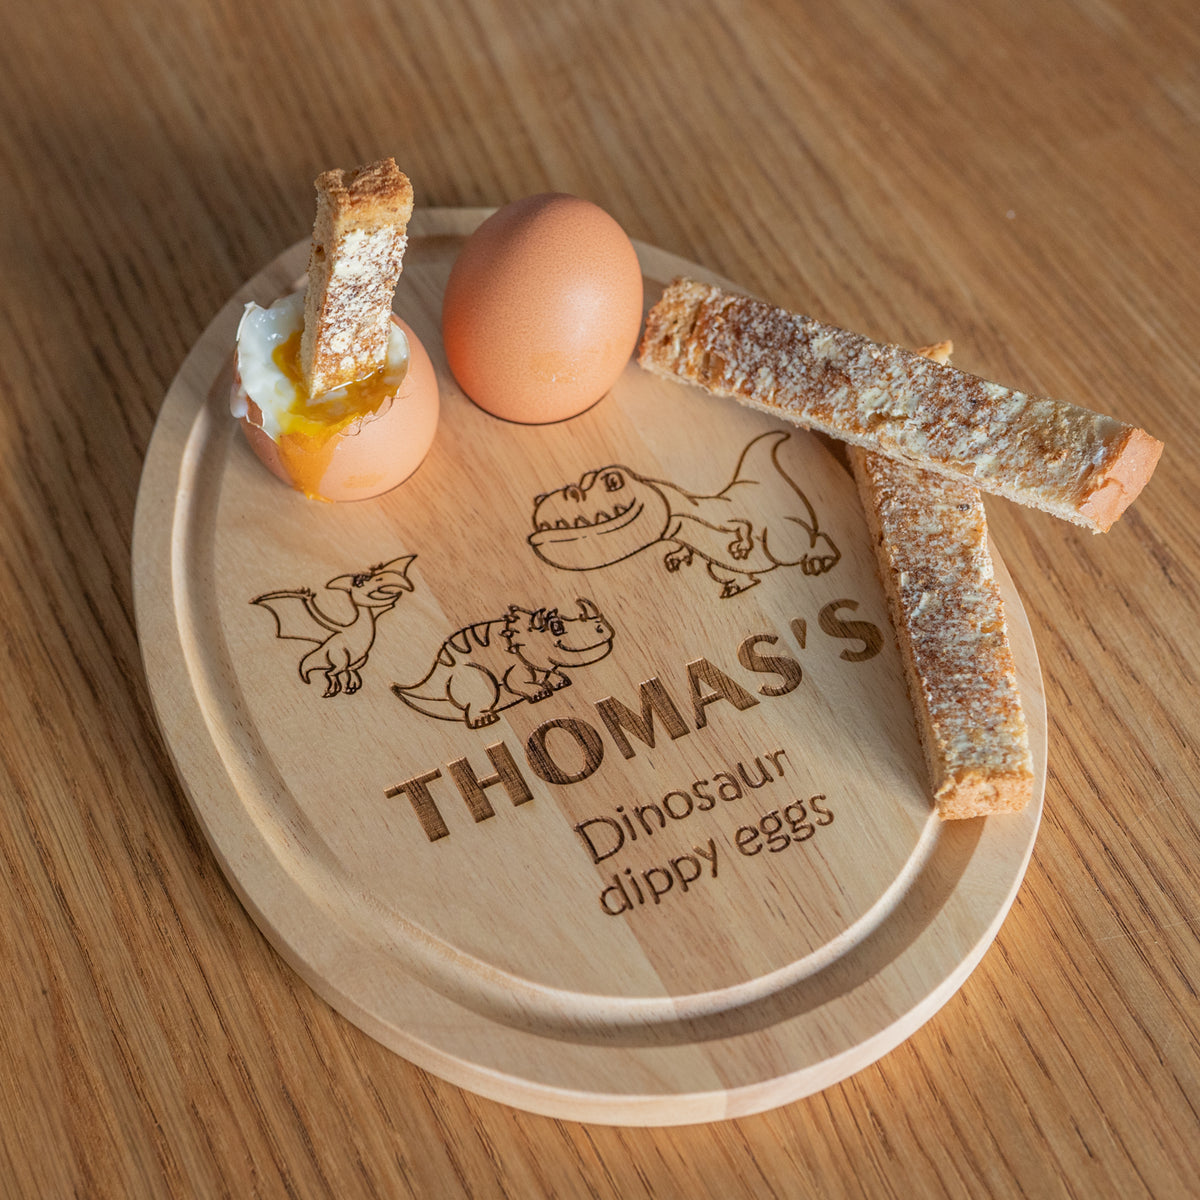 Dinosaur Egg &amp; Soldiers Dippy Egg Board